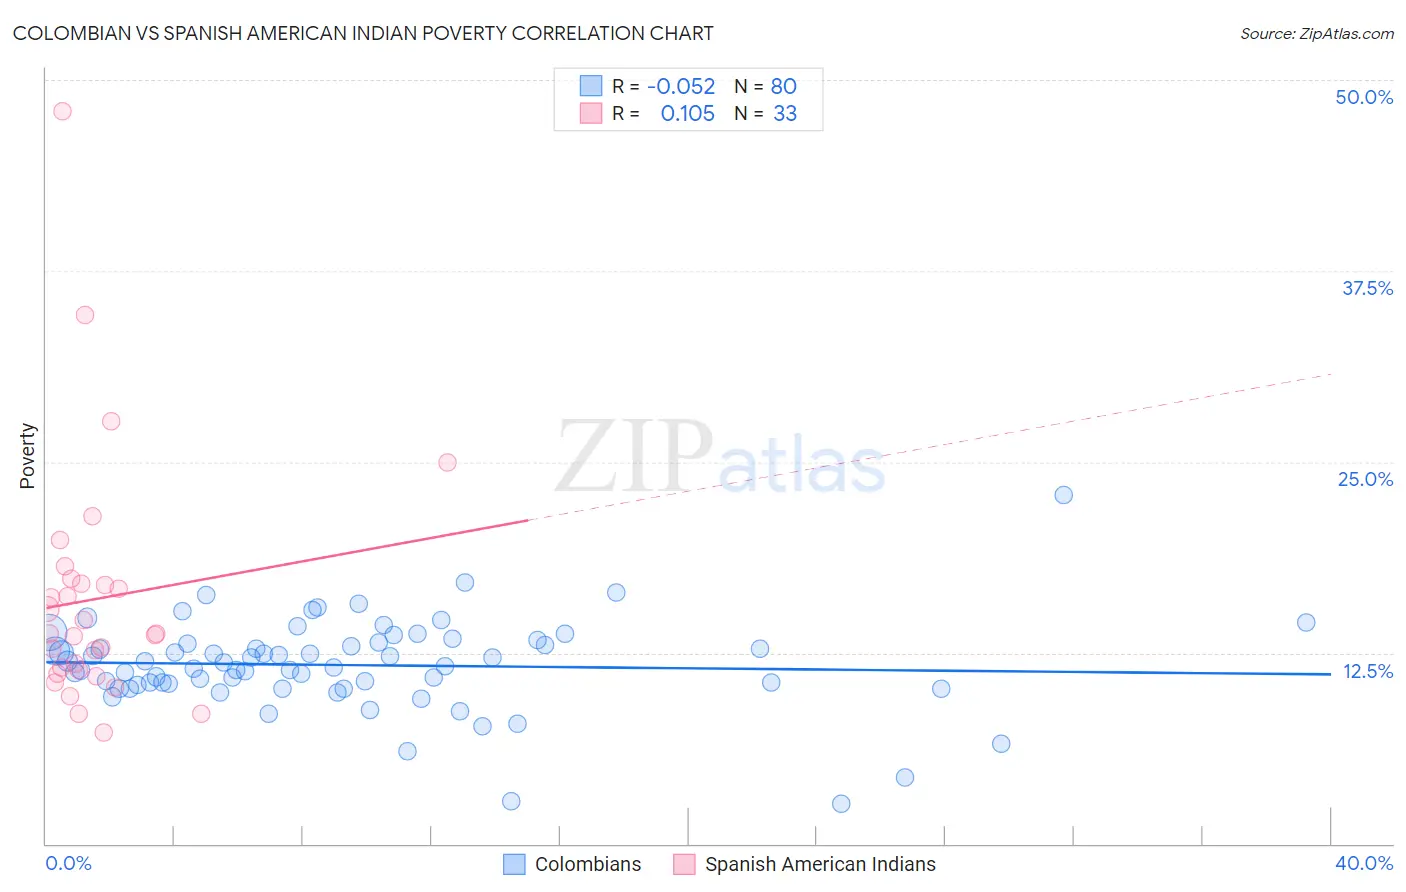 Colombian vs Spanish American Indian Poverty